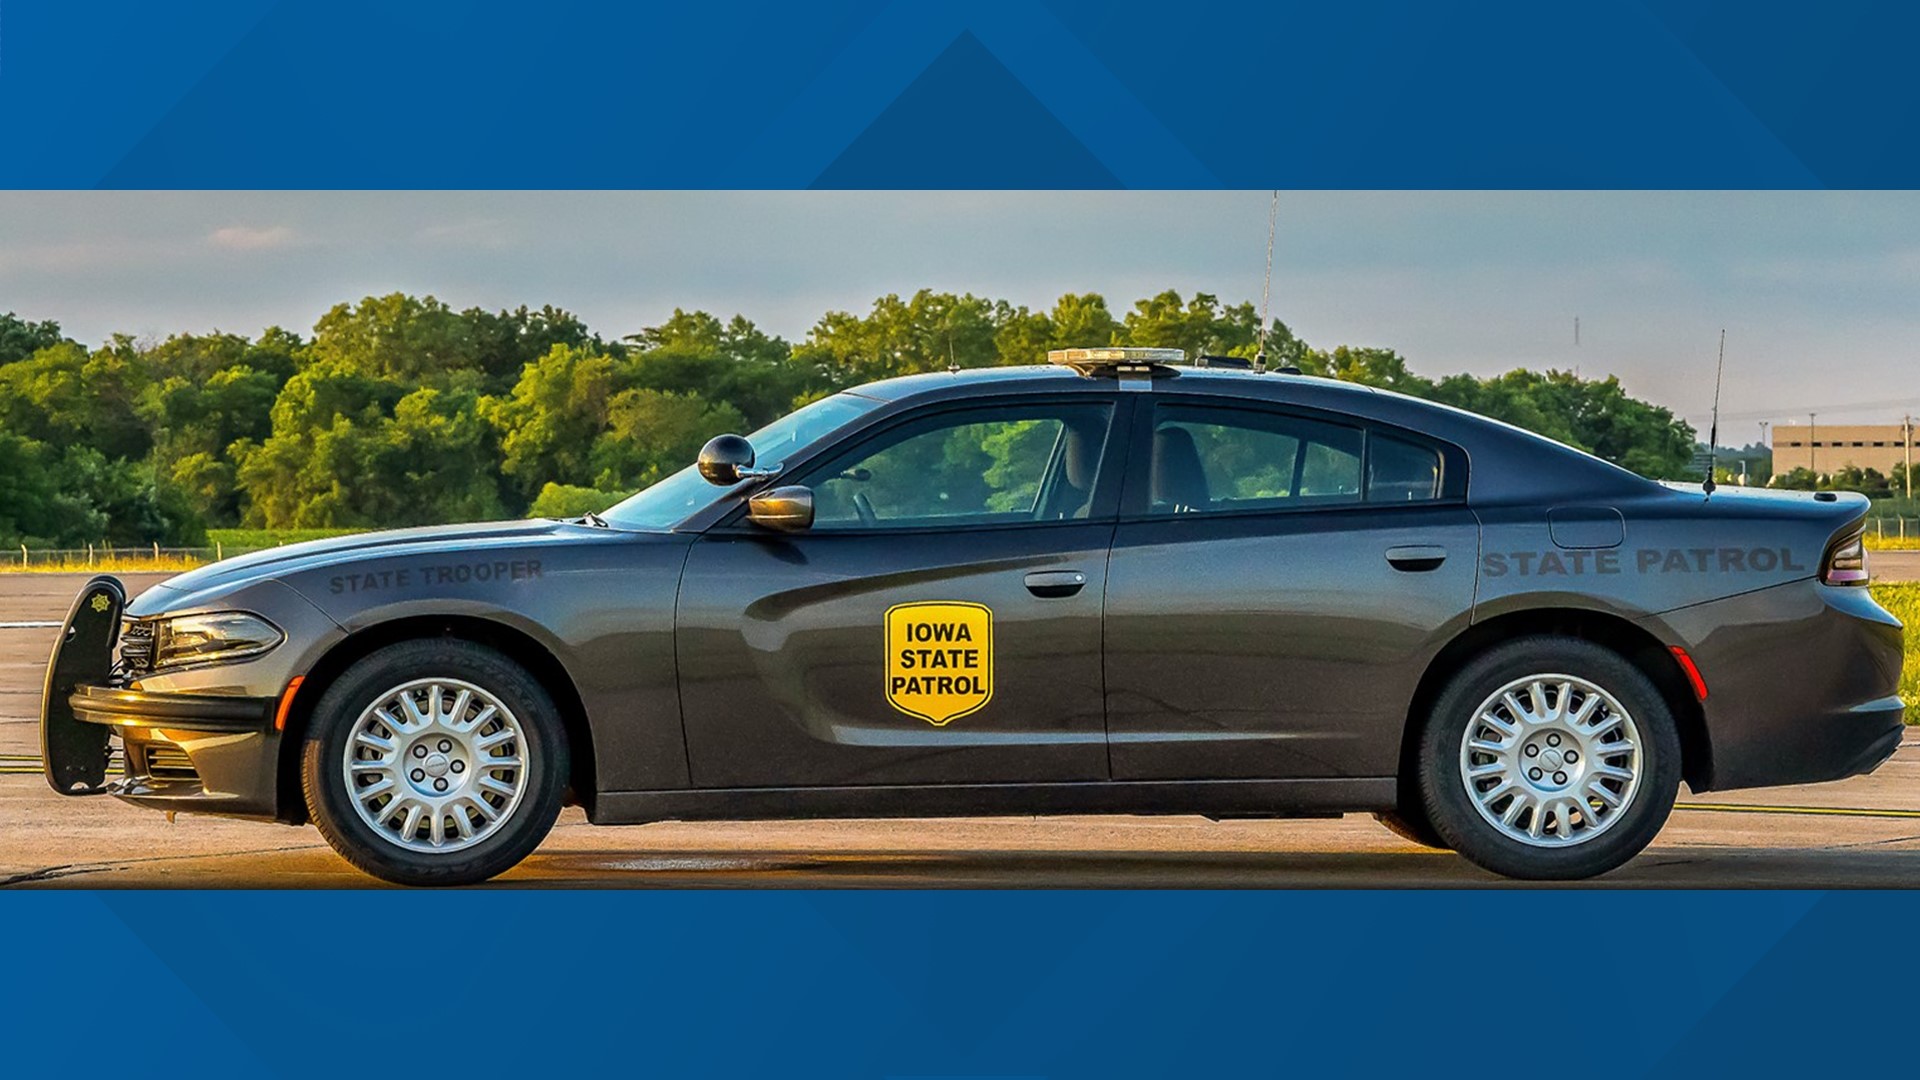 Last year, the Kentucky State Police cruiser took home the coveted prize.